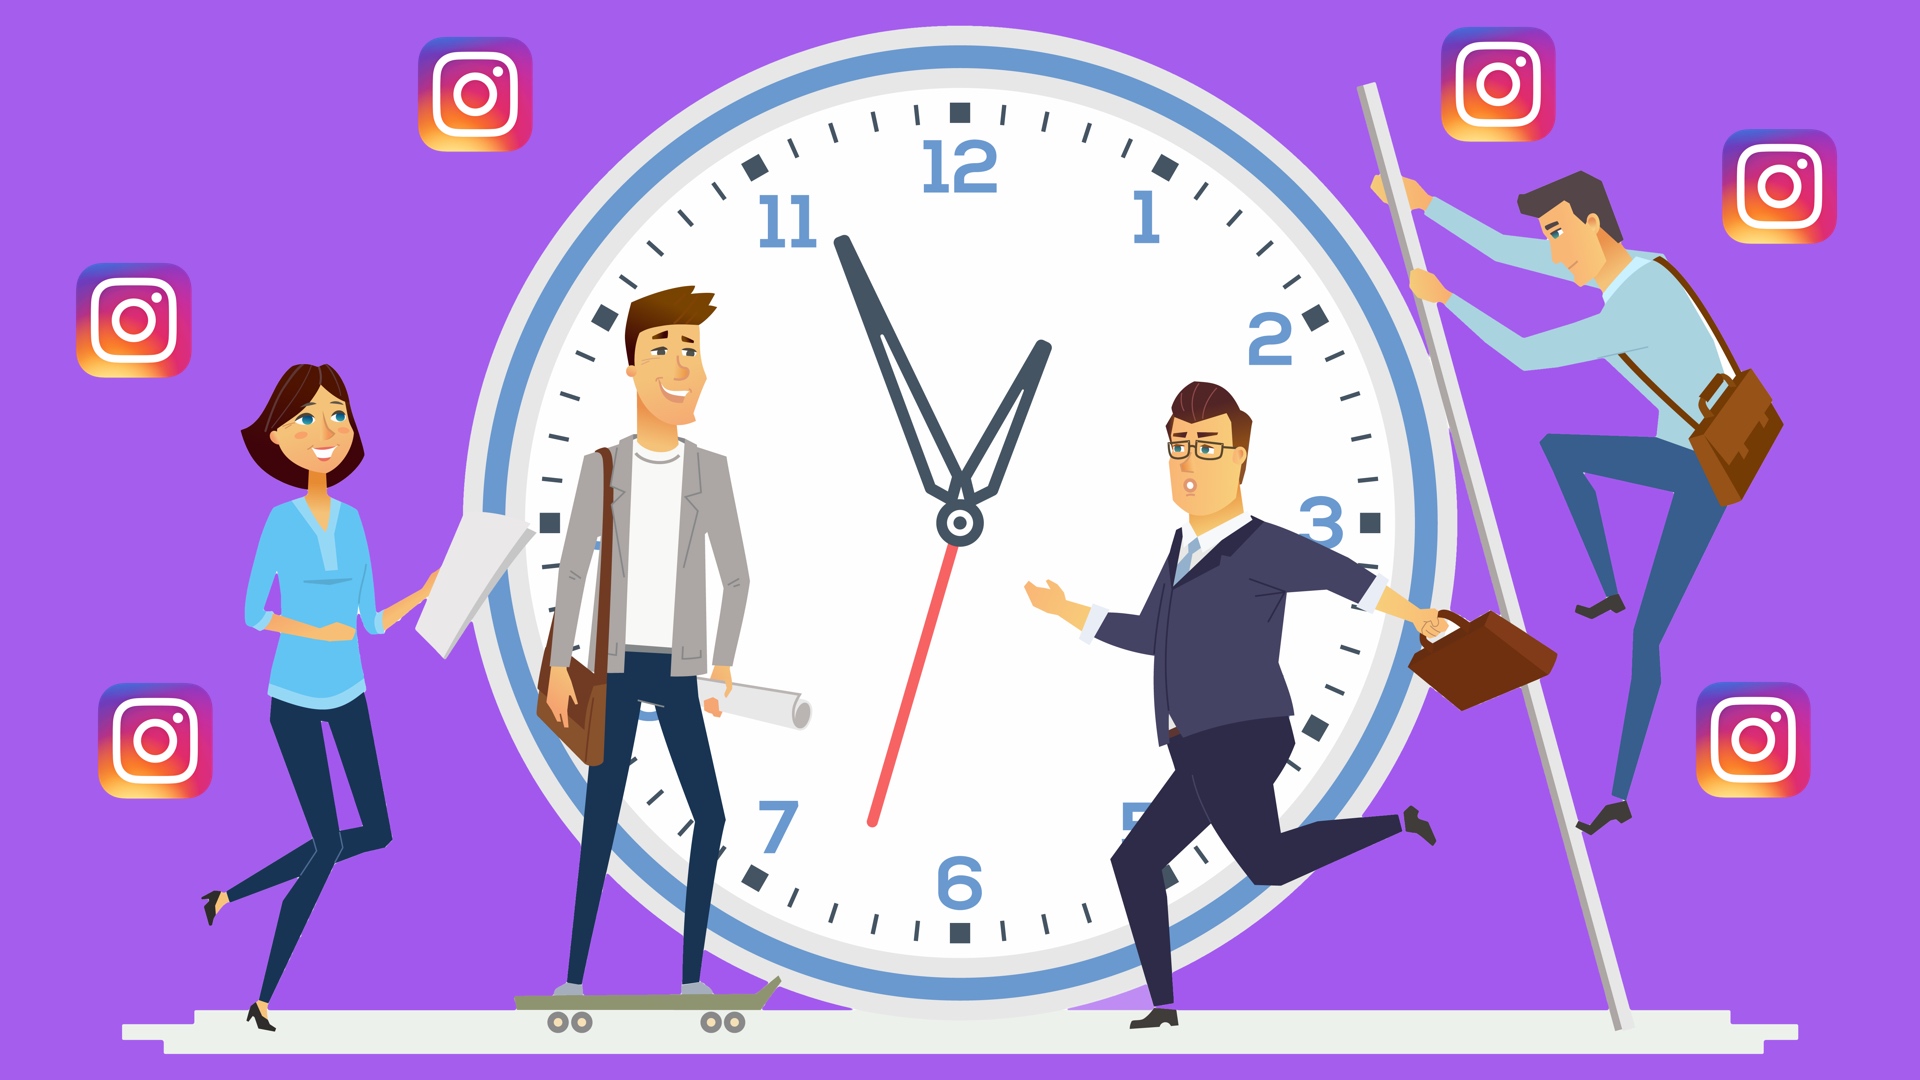 Time we best. The best time Post on Instagram. Time to картинки. To Post. Гуд тайм обои.